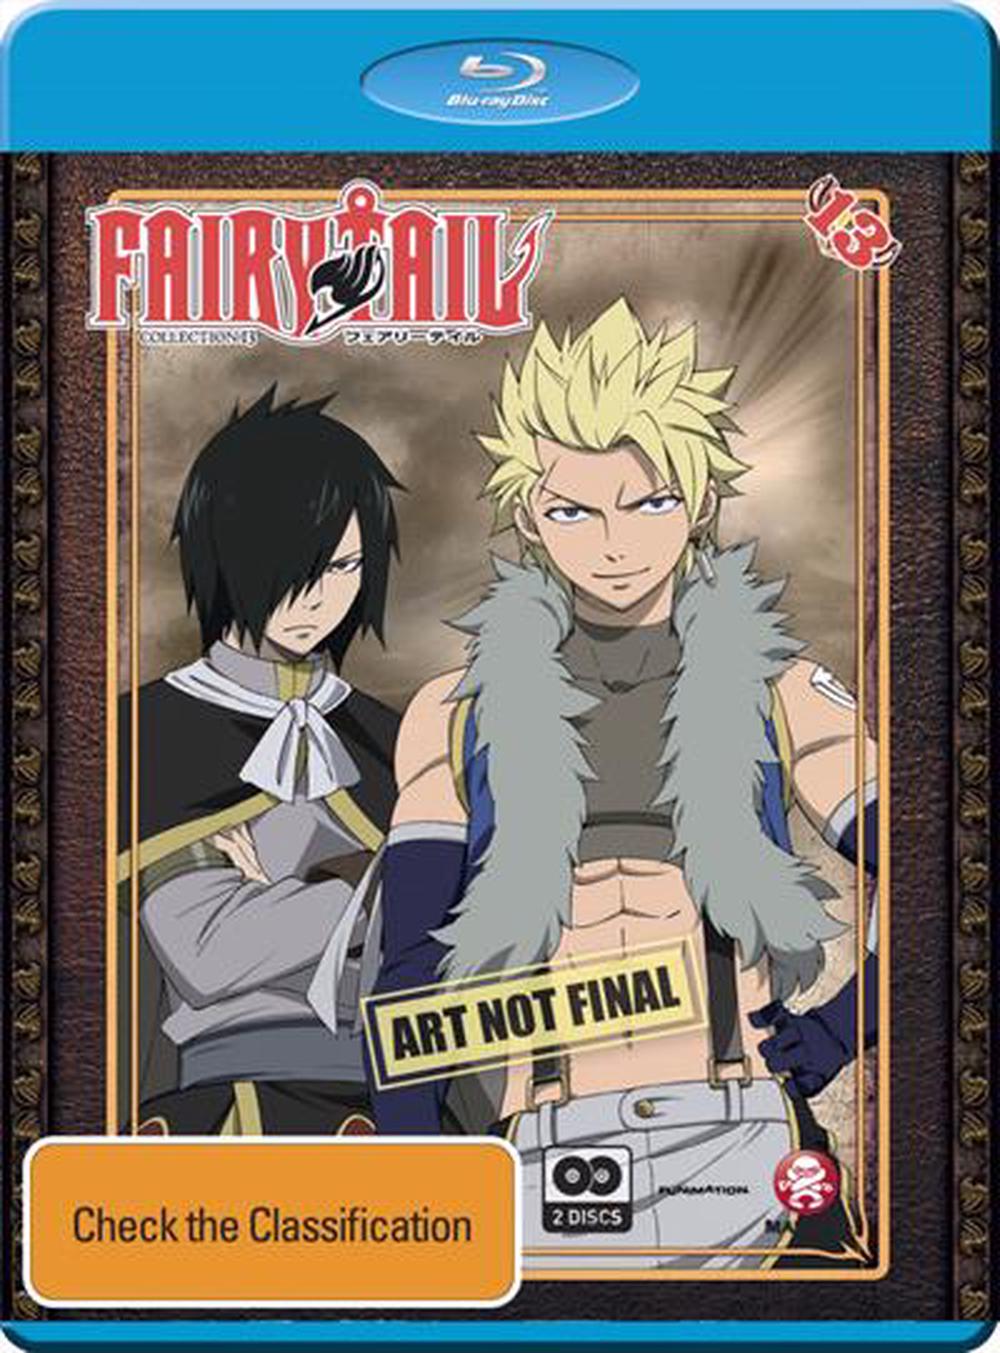 Fairy Tail Collection 13 Eps 143 153 Blu Ray Buy Online At The Nile